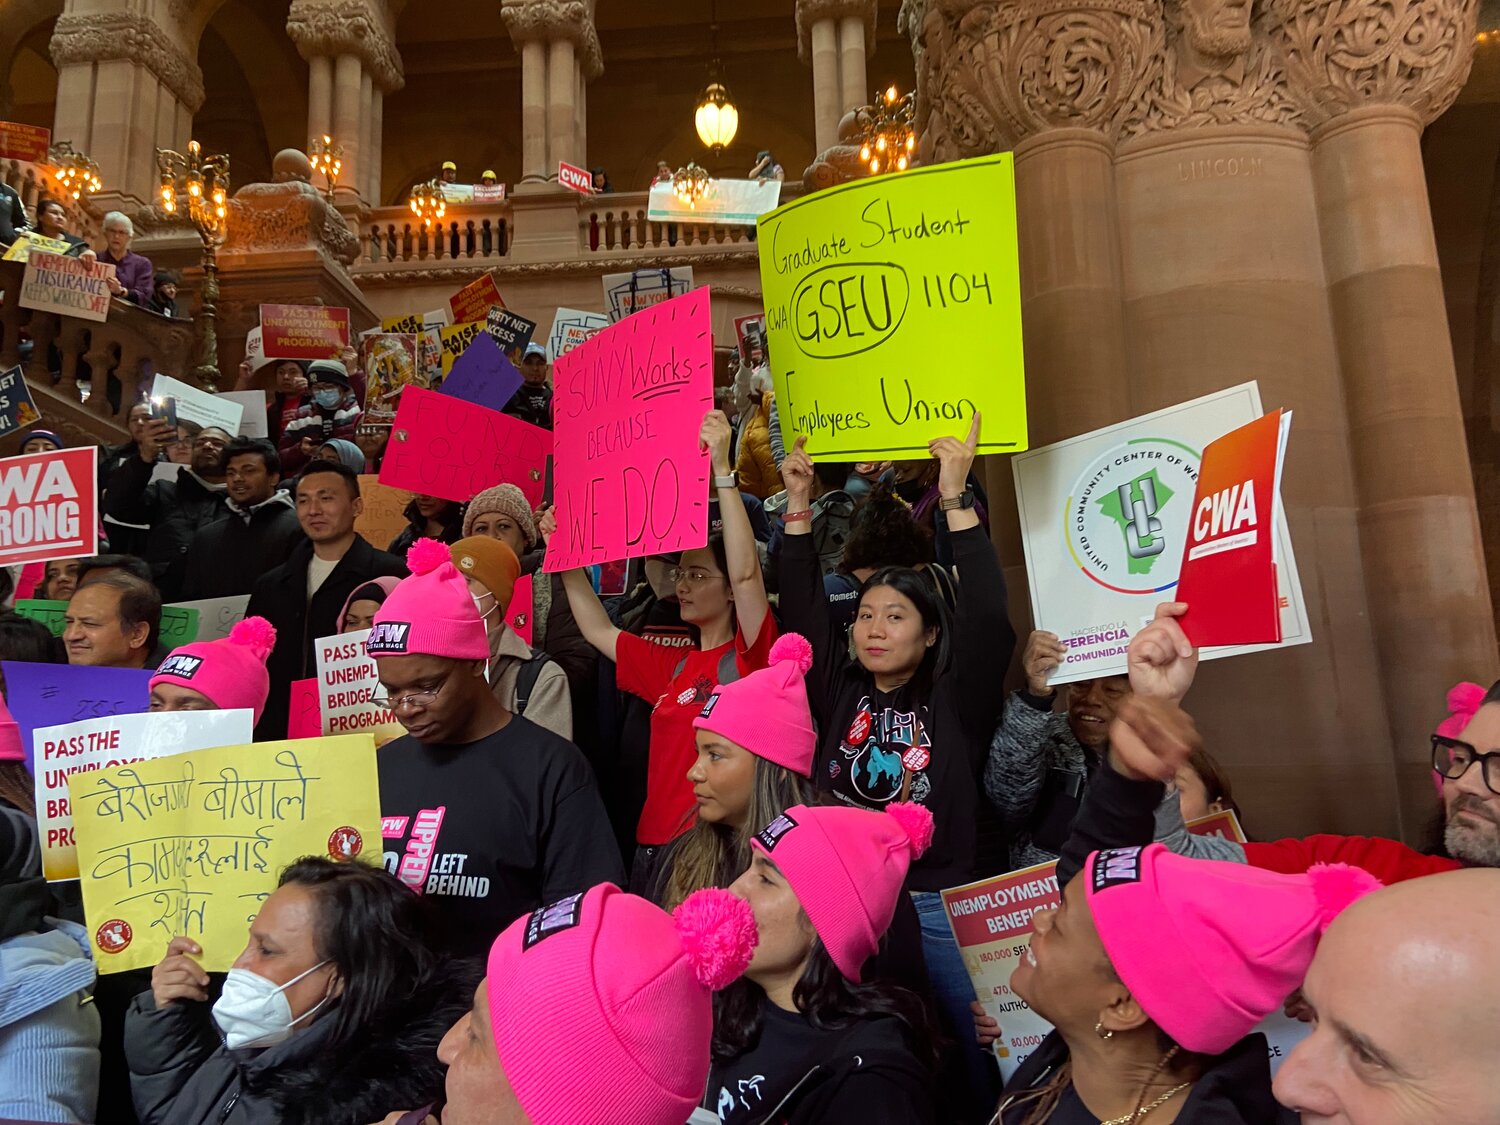 Activists and lawmakers rallied at the New York State Capitol in Albany on International Women's Day last week to call for an increase in the state's minimum wage, an end to sub-minimum wages and the creation of the unemployment bridge program, all of which they said would help low-income women.